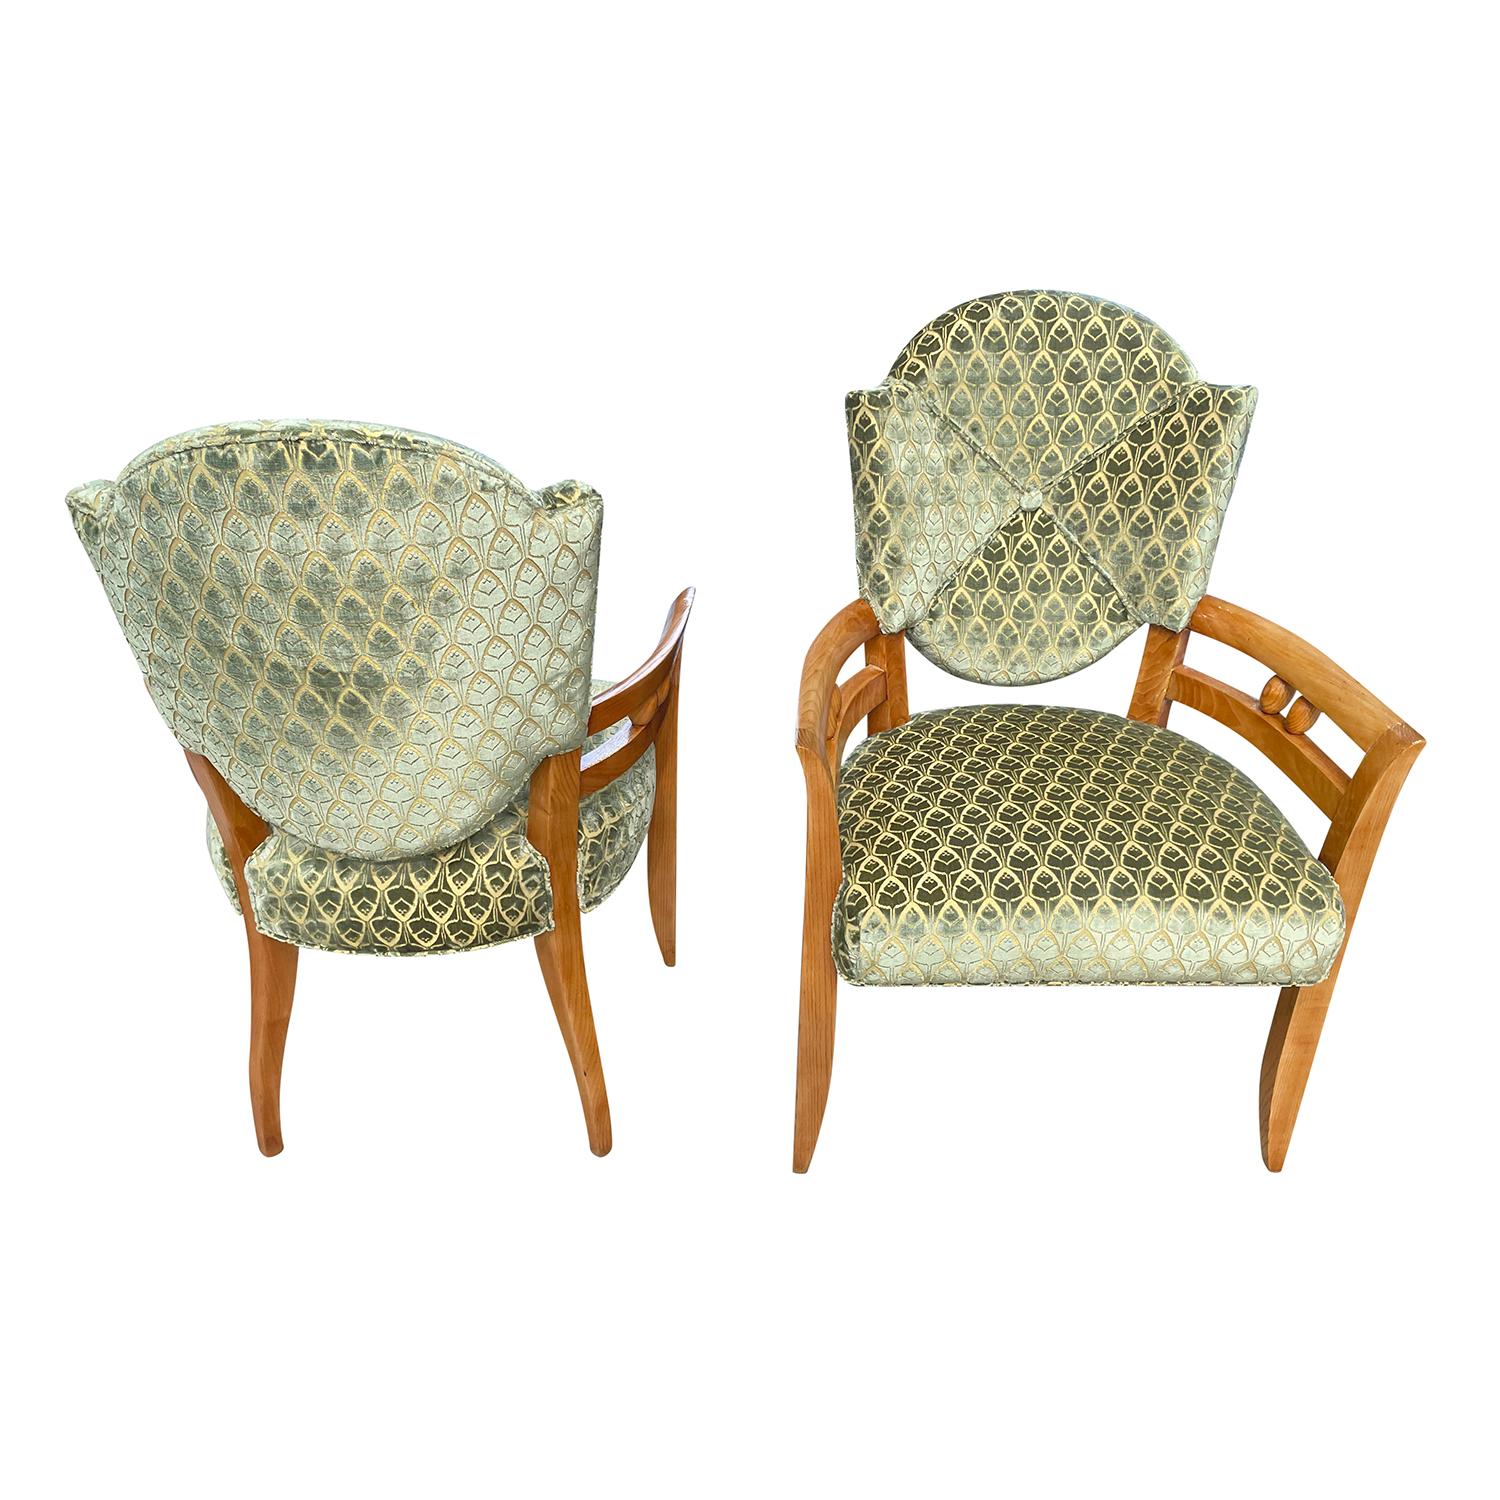 20th Century Pair of French Vintage Art Deco Oakwood Armchairs by André Arbus For Sale 3